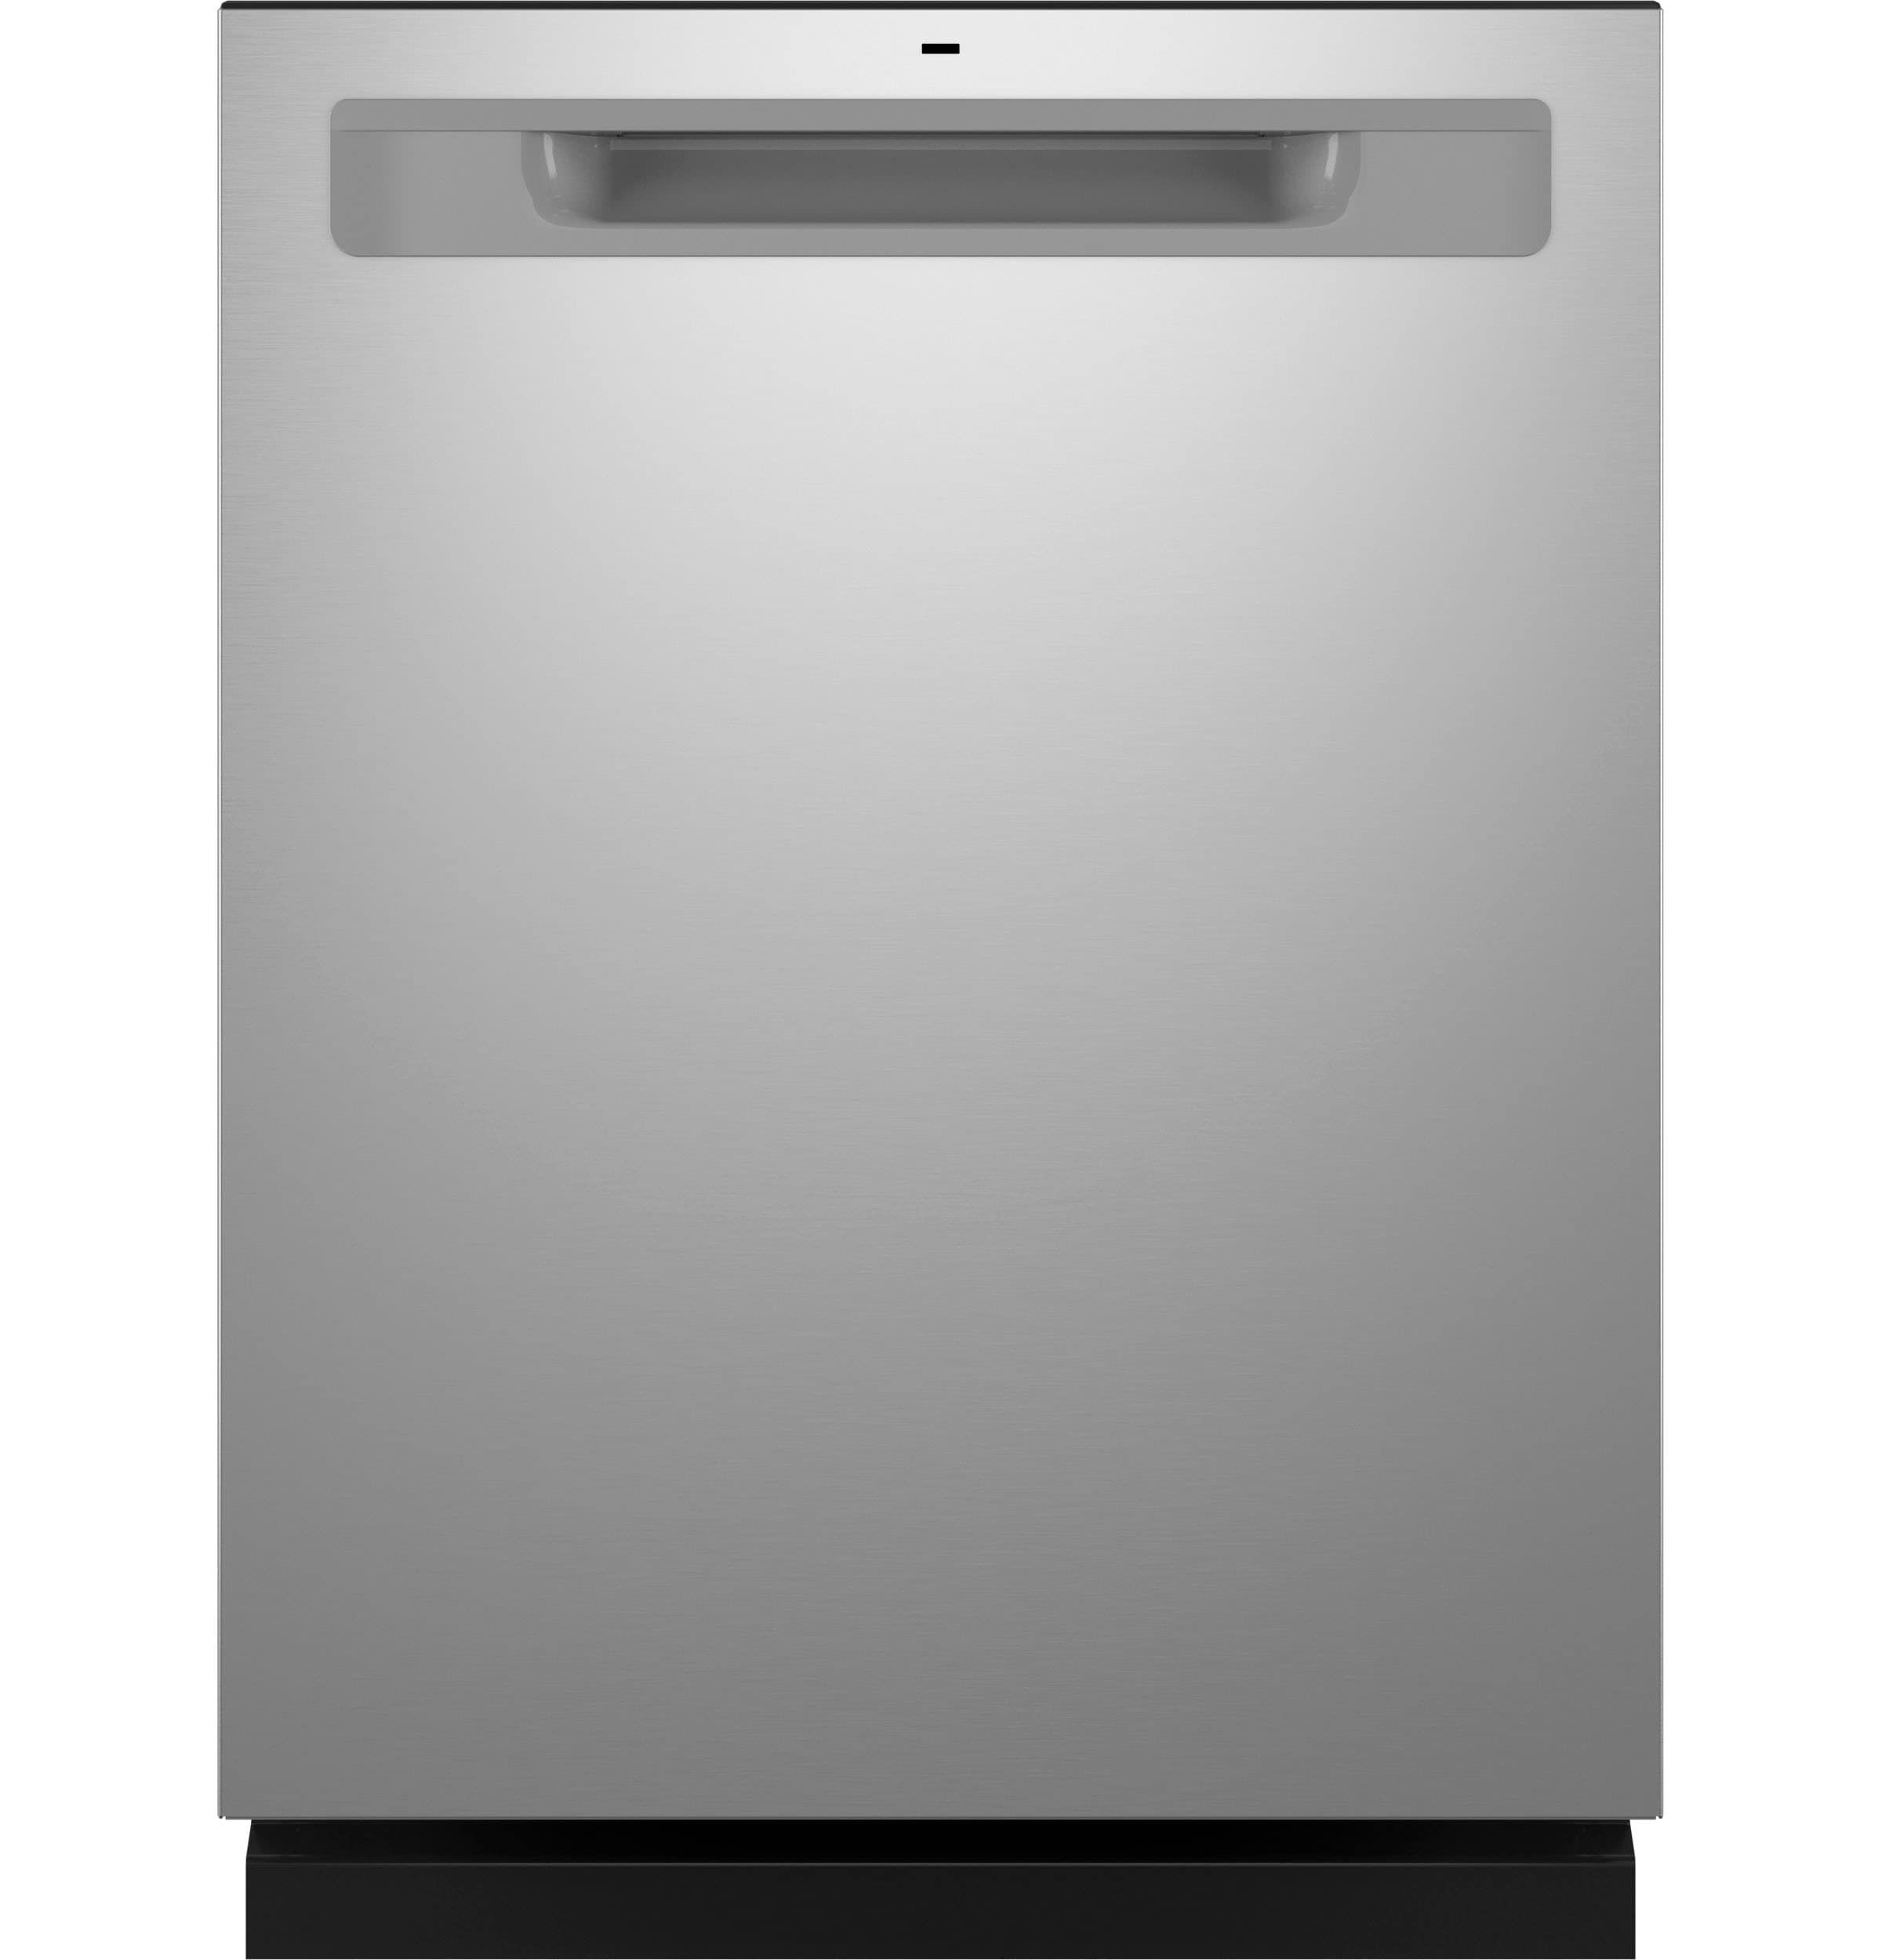 Buy GE Profile ENERGY STAR Top Control with Stainless Steel